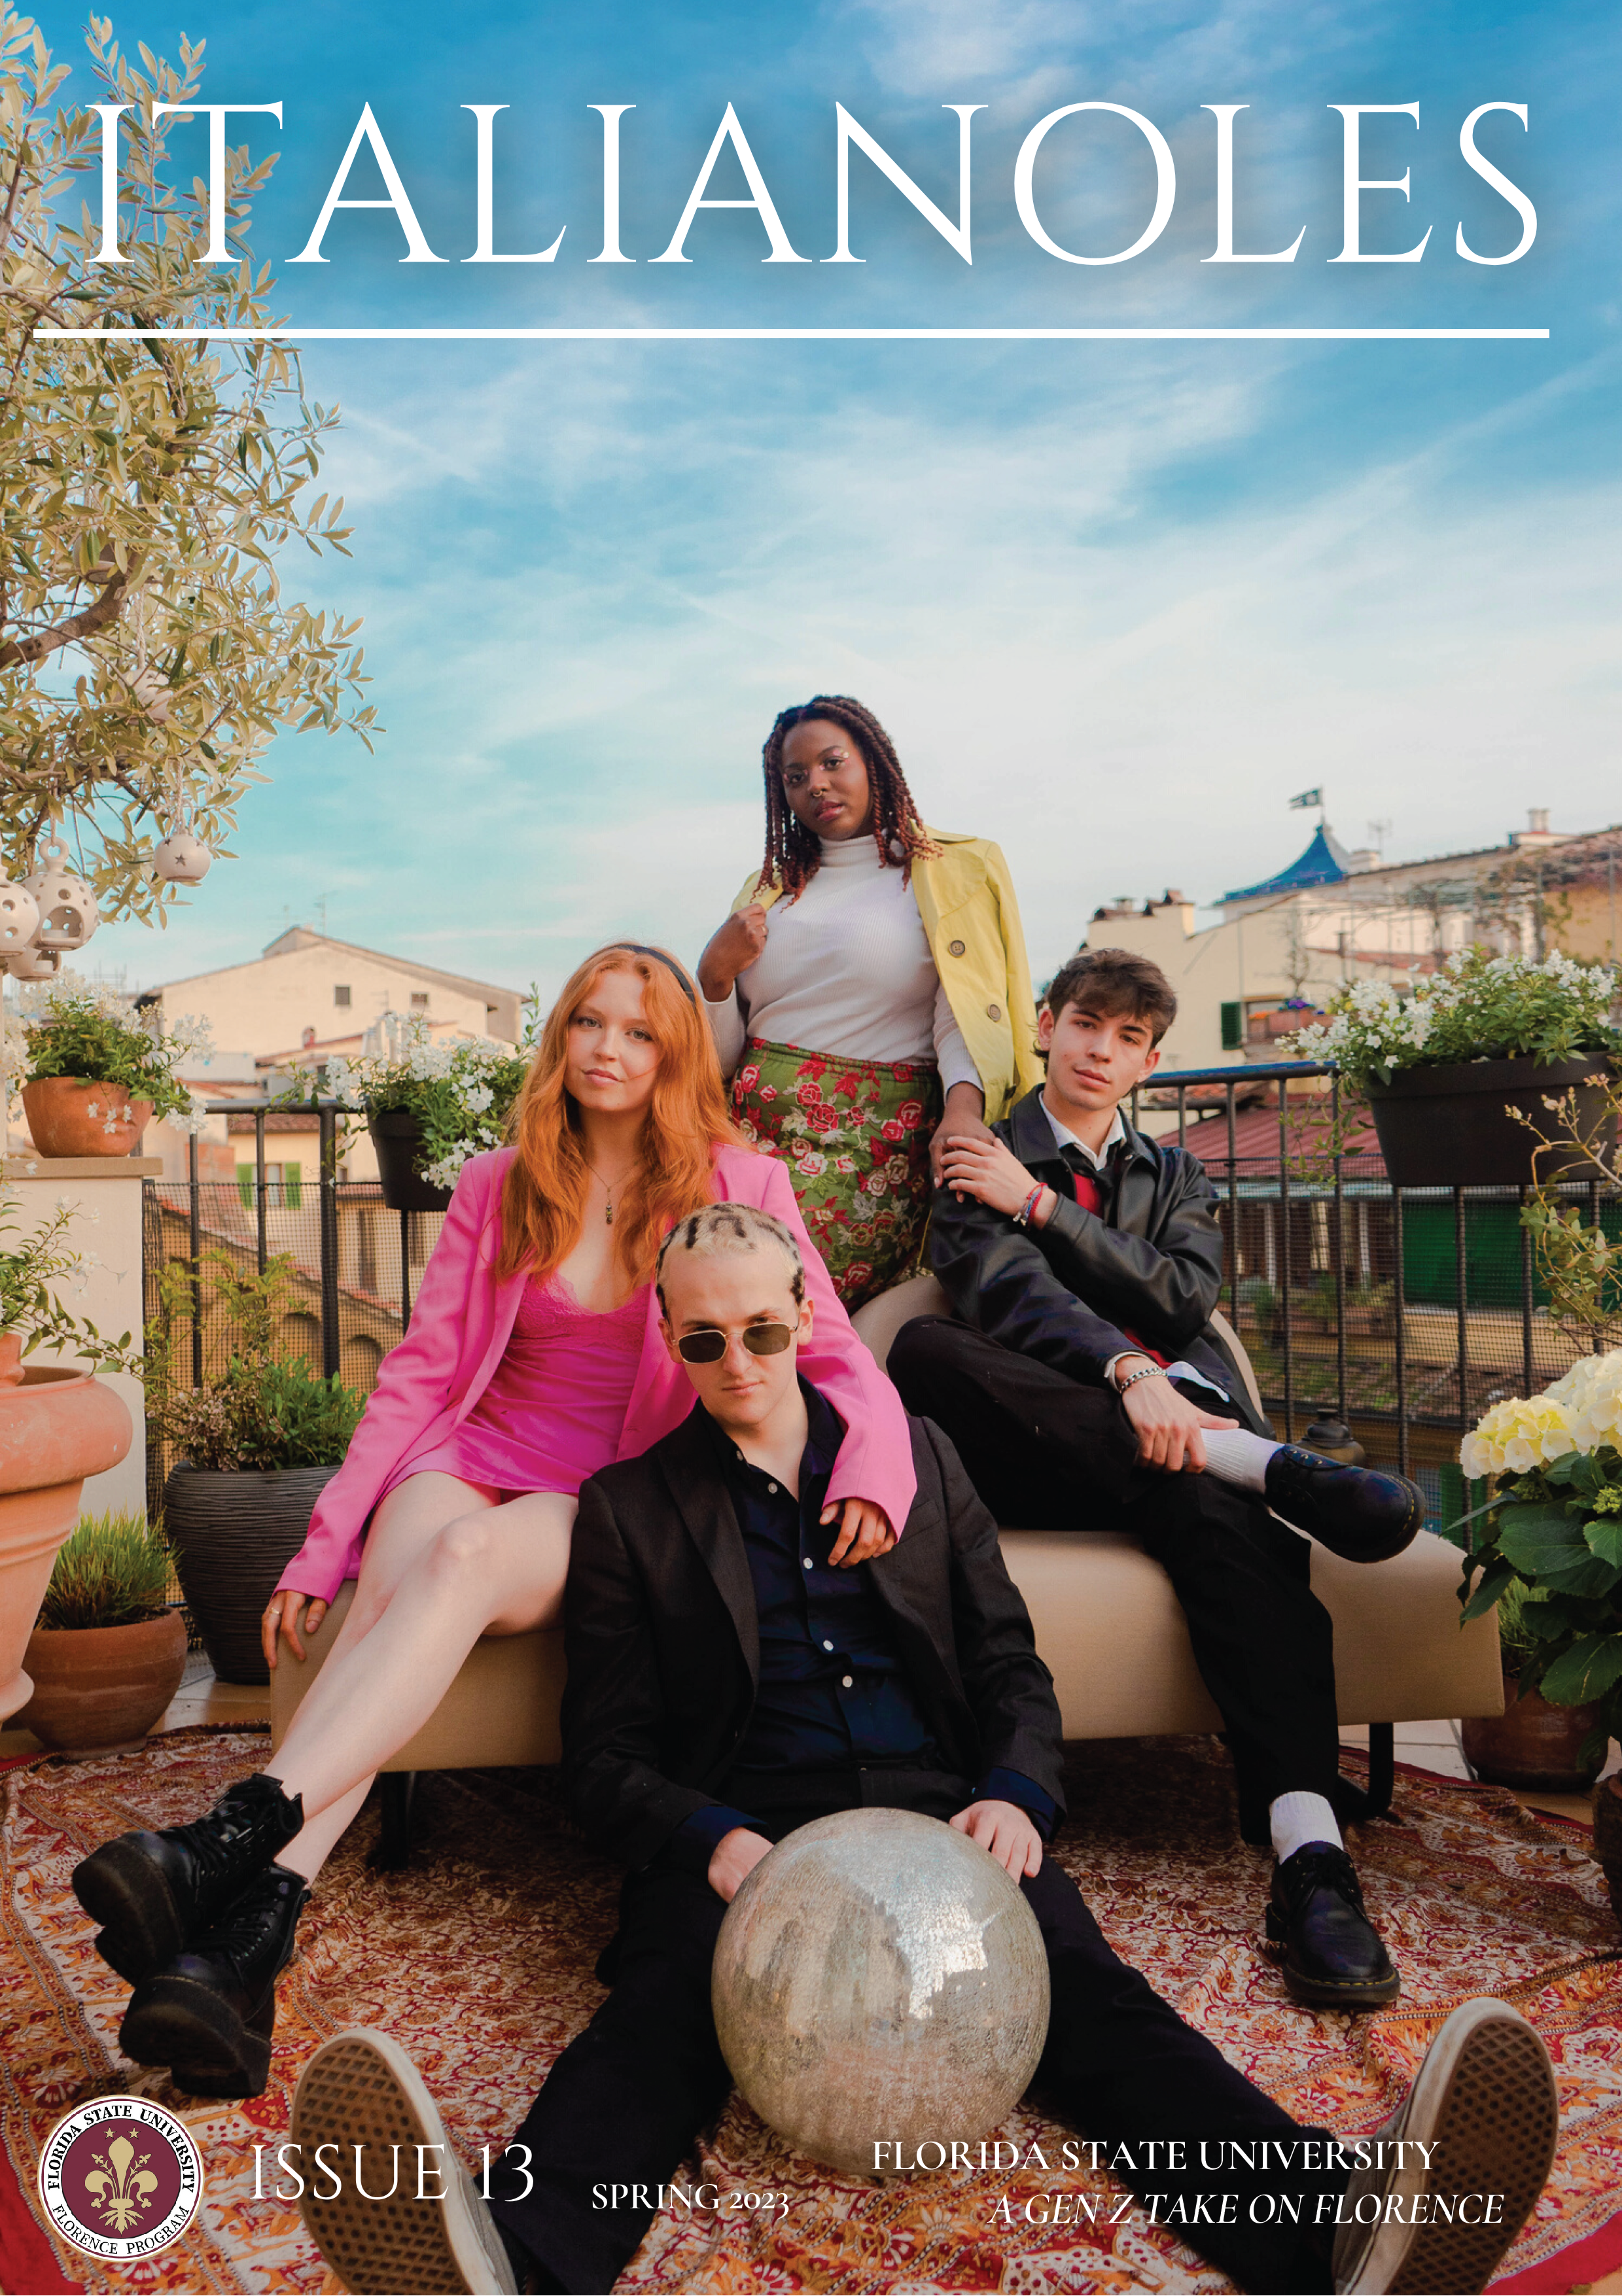 Cover for Italianoles volume 13, for spring 2023 with the subtitle A Gen Z take on Florence. A group of four young adults in fashionable clothing sit posed on a rooftop overlooking an urban skyline.